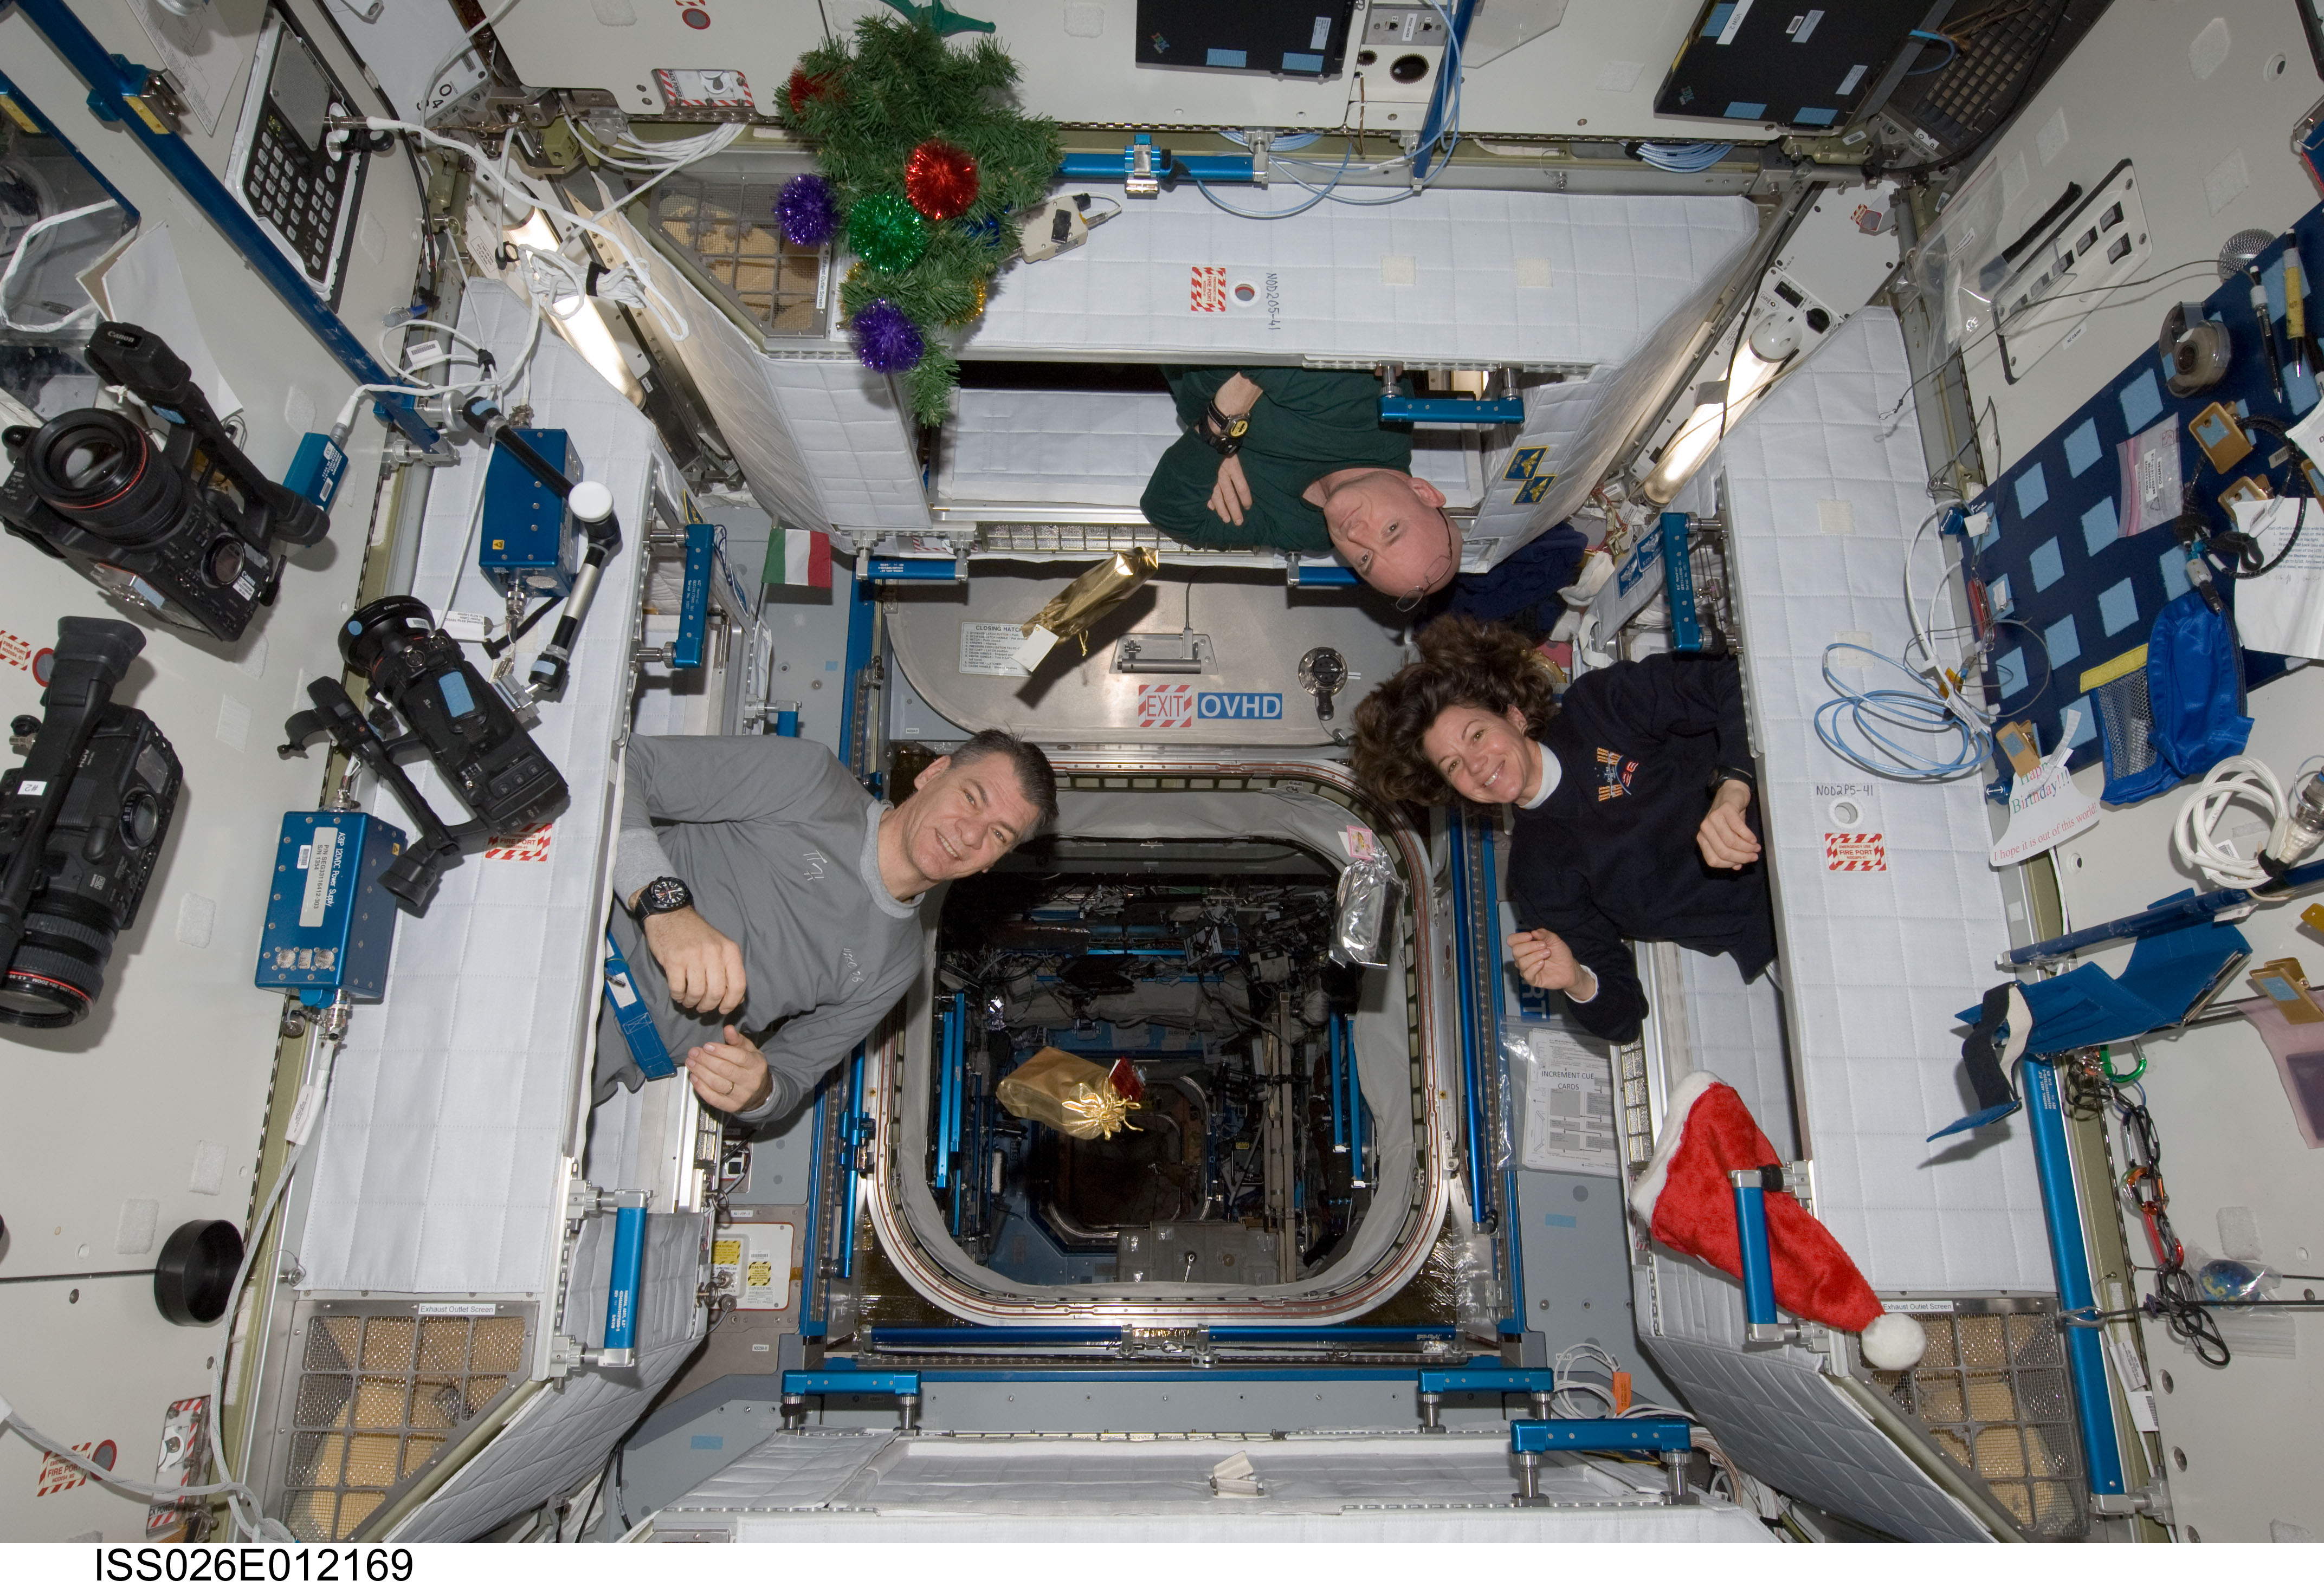 Expedition 26 crew members Paolo Nespoli (left), Scott Kelly (top) and Catherine "Cady" Coleman bail out of their sleeping quarters in the Harmony node of the International Space Station (ISS) on Christmas morning in 2010. Photo Credit: NASA